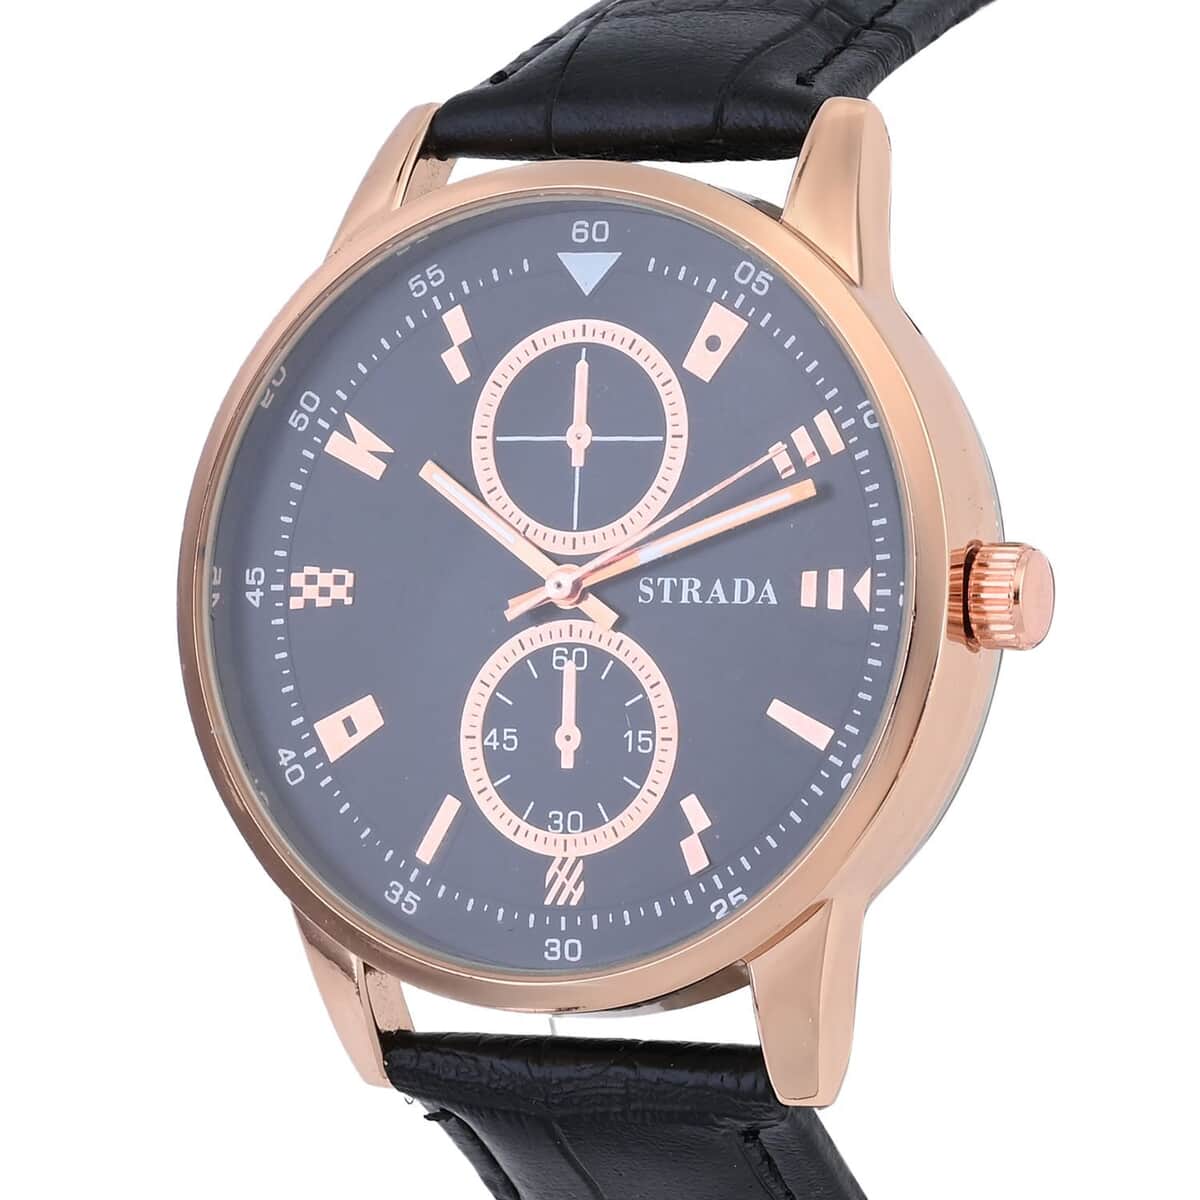 Strada Japanese Movement Watch in Rosetone with Black Faux Leather Strap (40.65mm) (5.75-7.75 Inches) image number 3